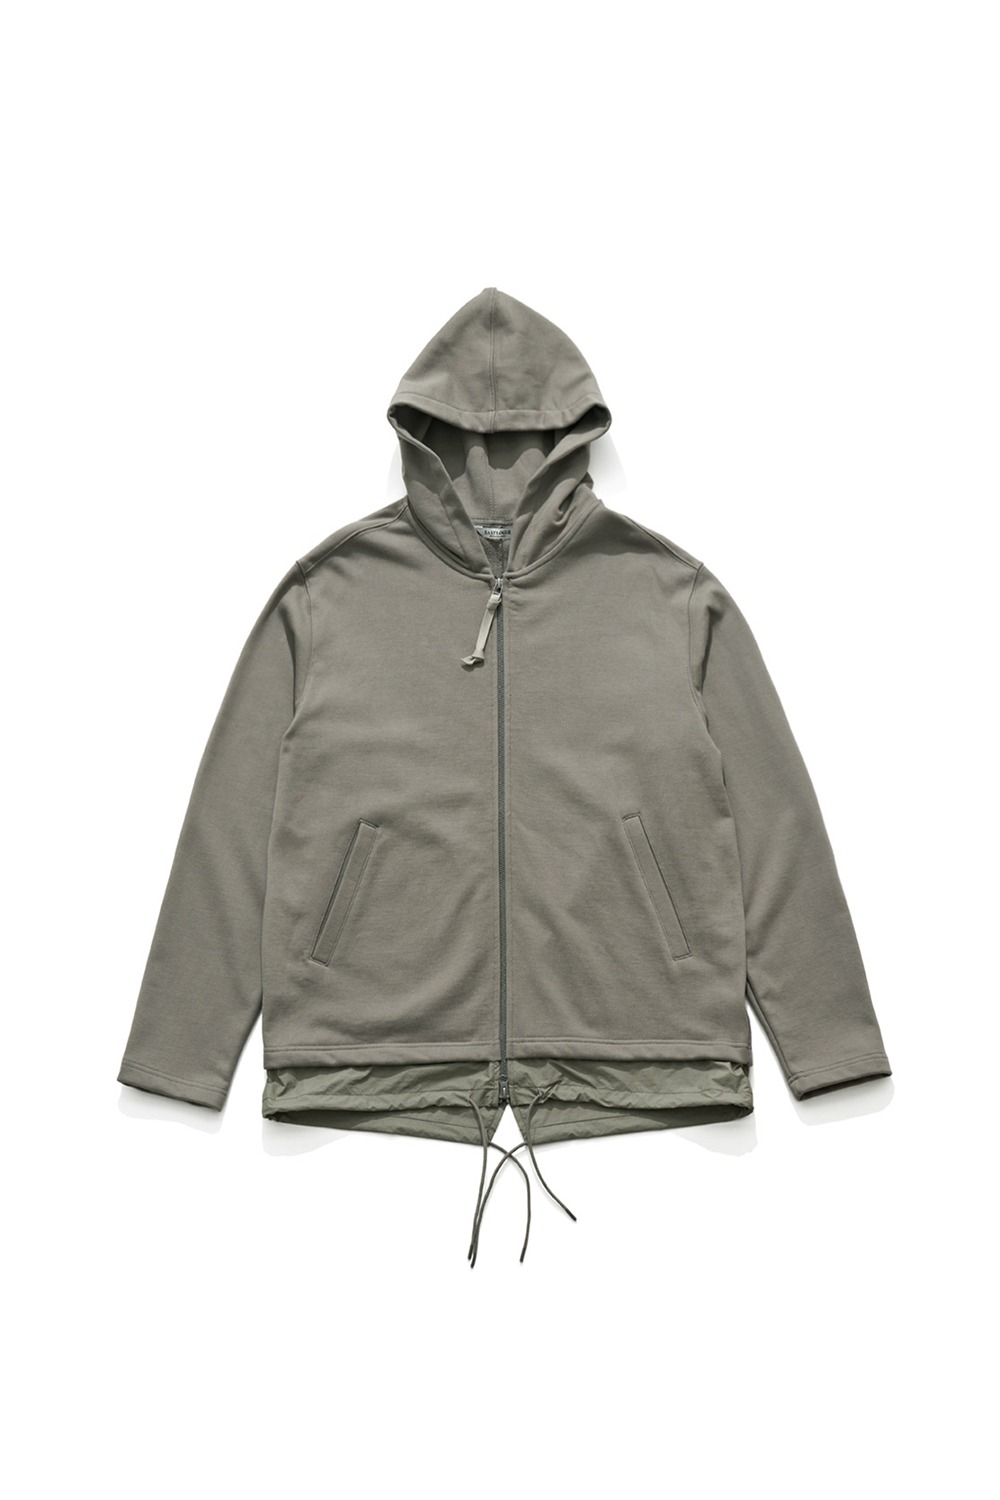 FISHTAIL HOODED ZIP UP / TAN